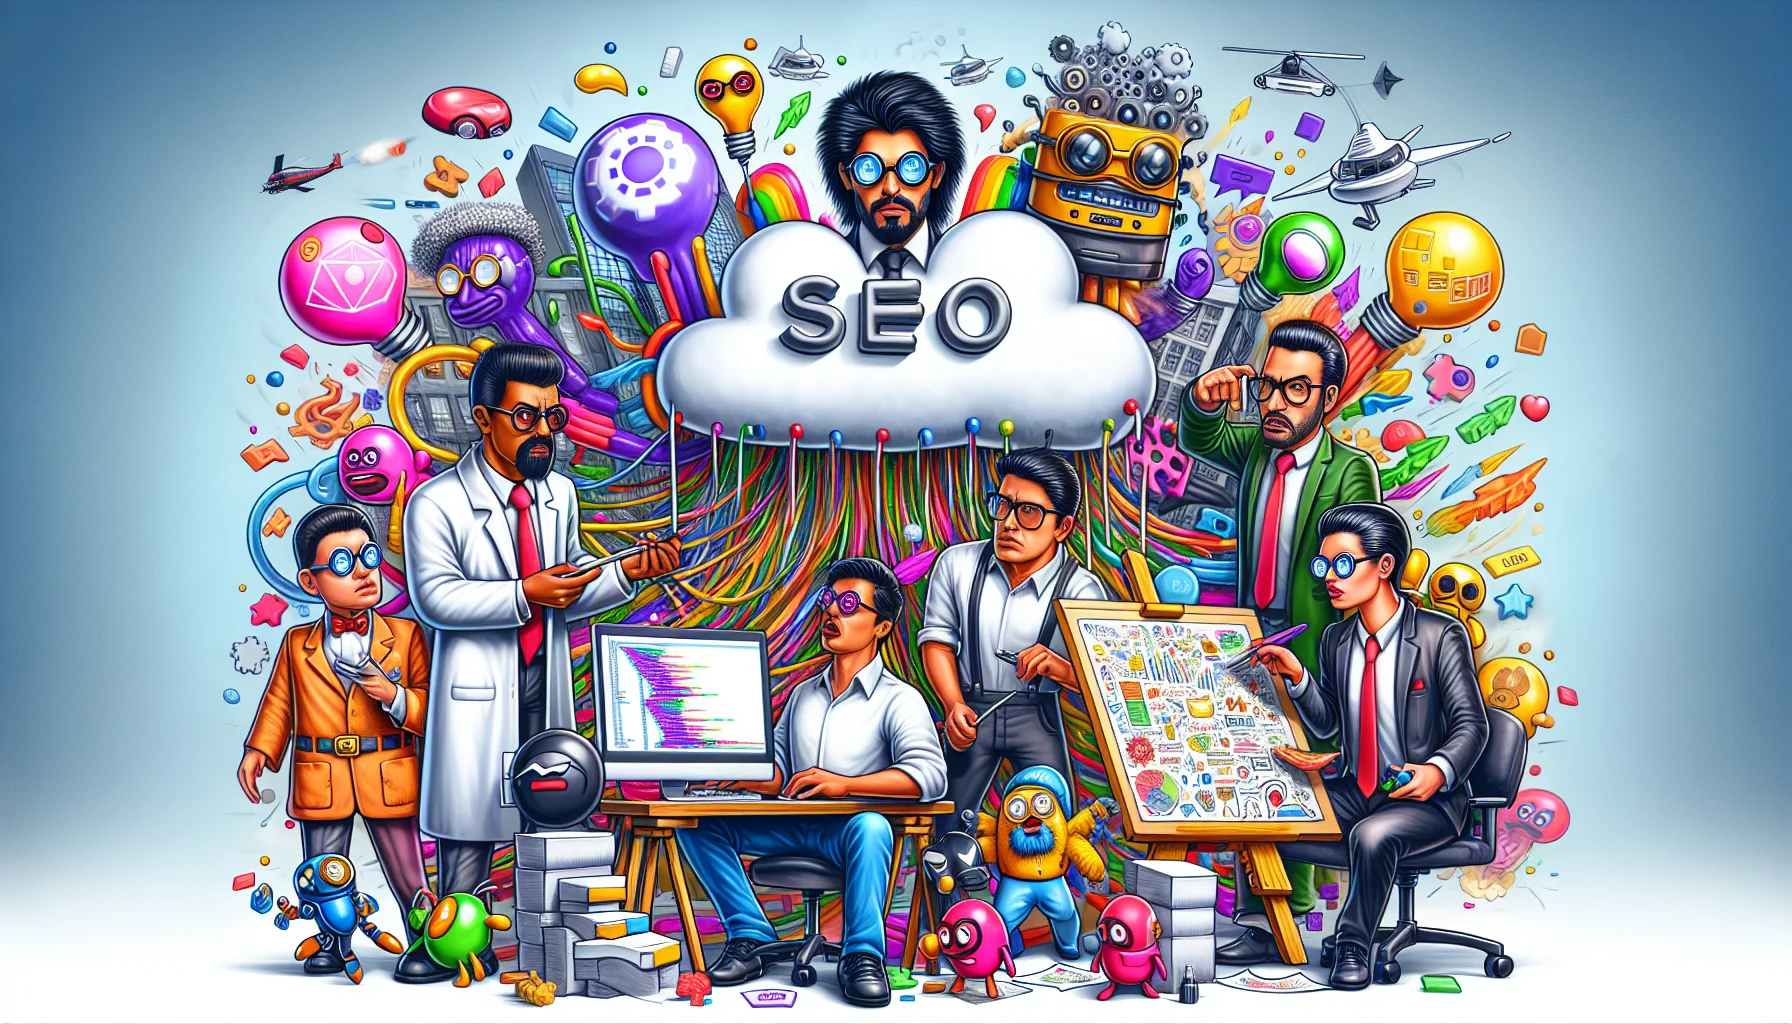 Imagine a humor-driven picture showcasing an ideal SEO website builder. There's a vivid, flamboyant office environment. Several comical characters, each one representing a different aspect of website building and SEO optimization, are present. One is a Middle Eastern female coding whiz with glasses, feverishly working on a computer. Another is a Hispanic male artist who is drawing exquisite designs. The two are preparing the web hosting platform, symbolized by a large, fluffy cloud they’re diligently shaping. The website builder is personified as an expert, a South Asian male, handing out stylish, tech-laden tools to these characters. Tiny digital robots, representing search engine bots, are playfully exploring the scene, adding a touch of whimsy.